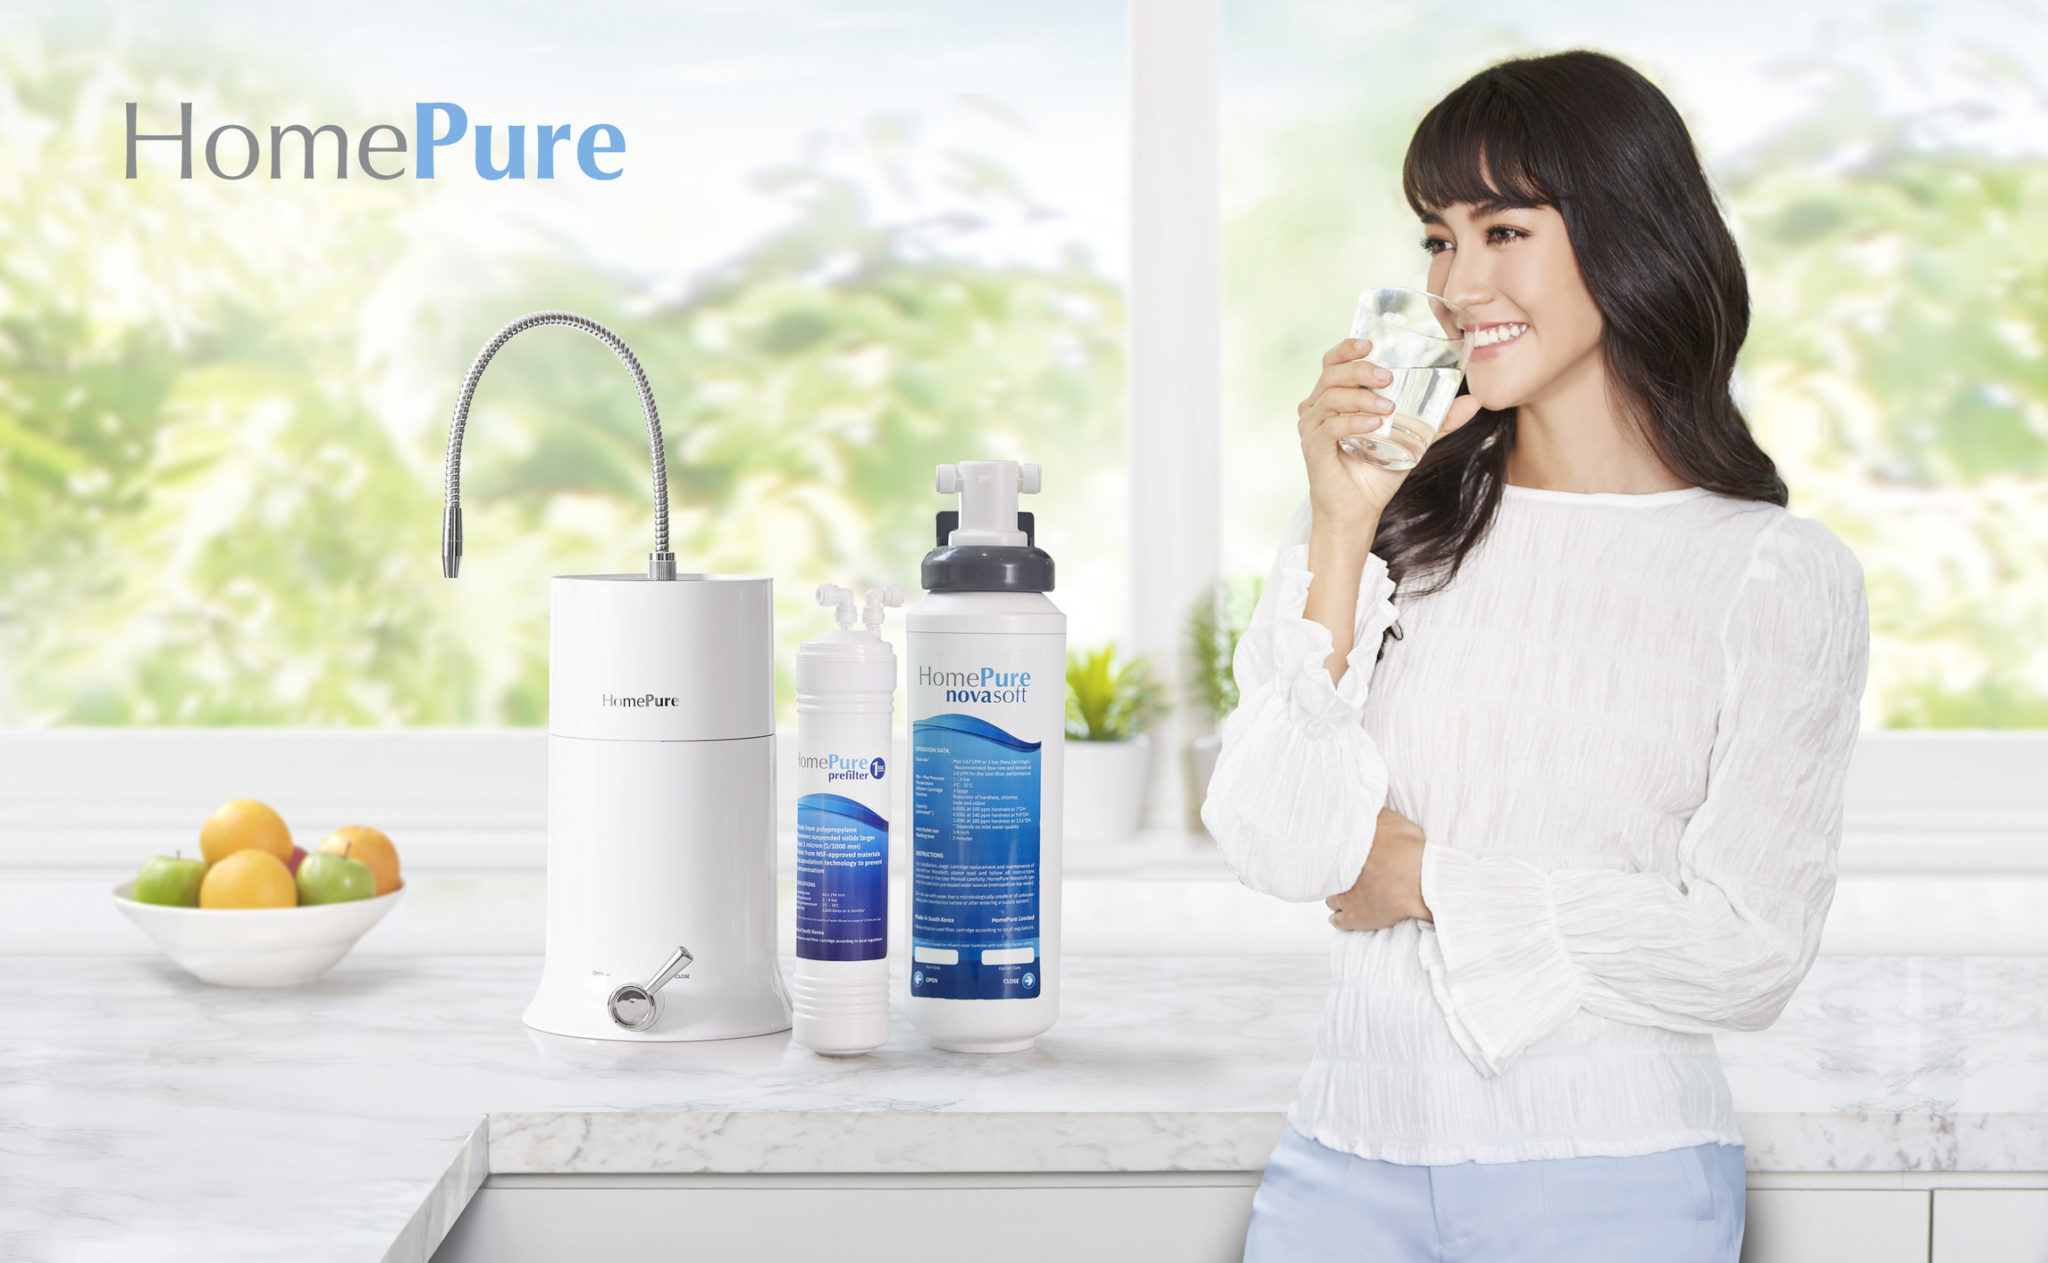 HomePure Complete Water Filtration System from QNET India